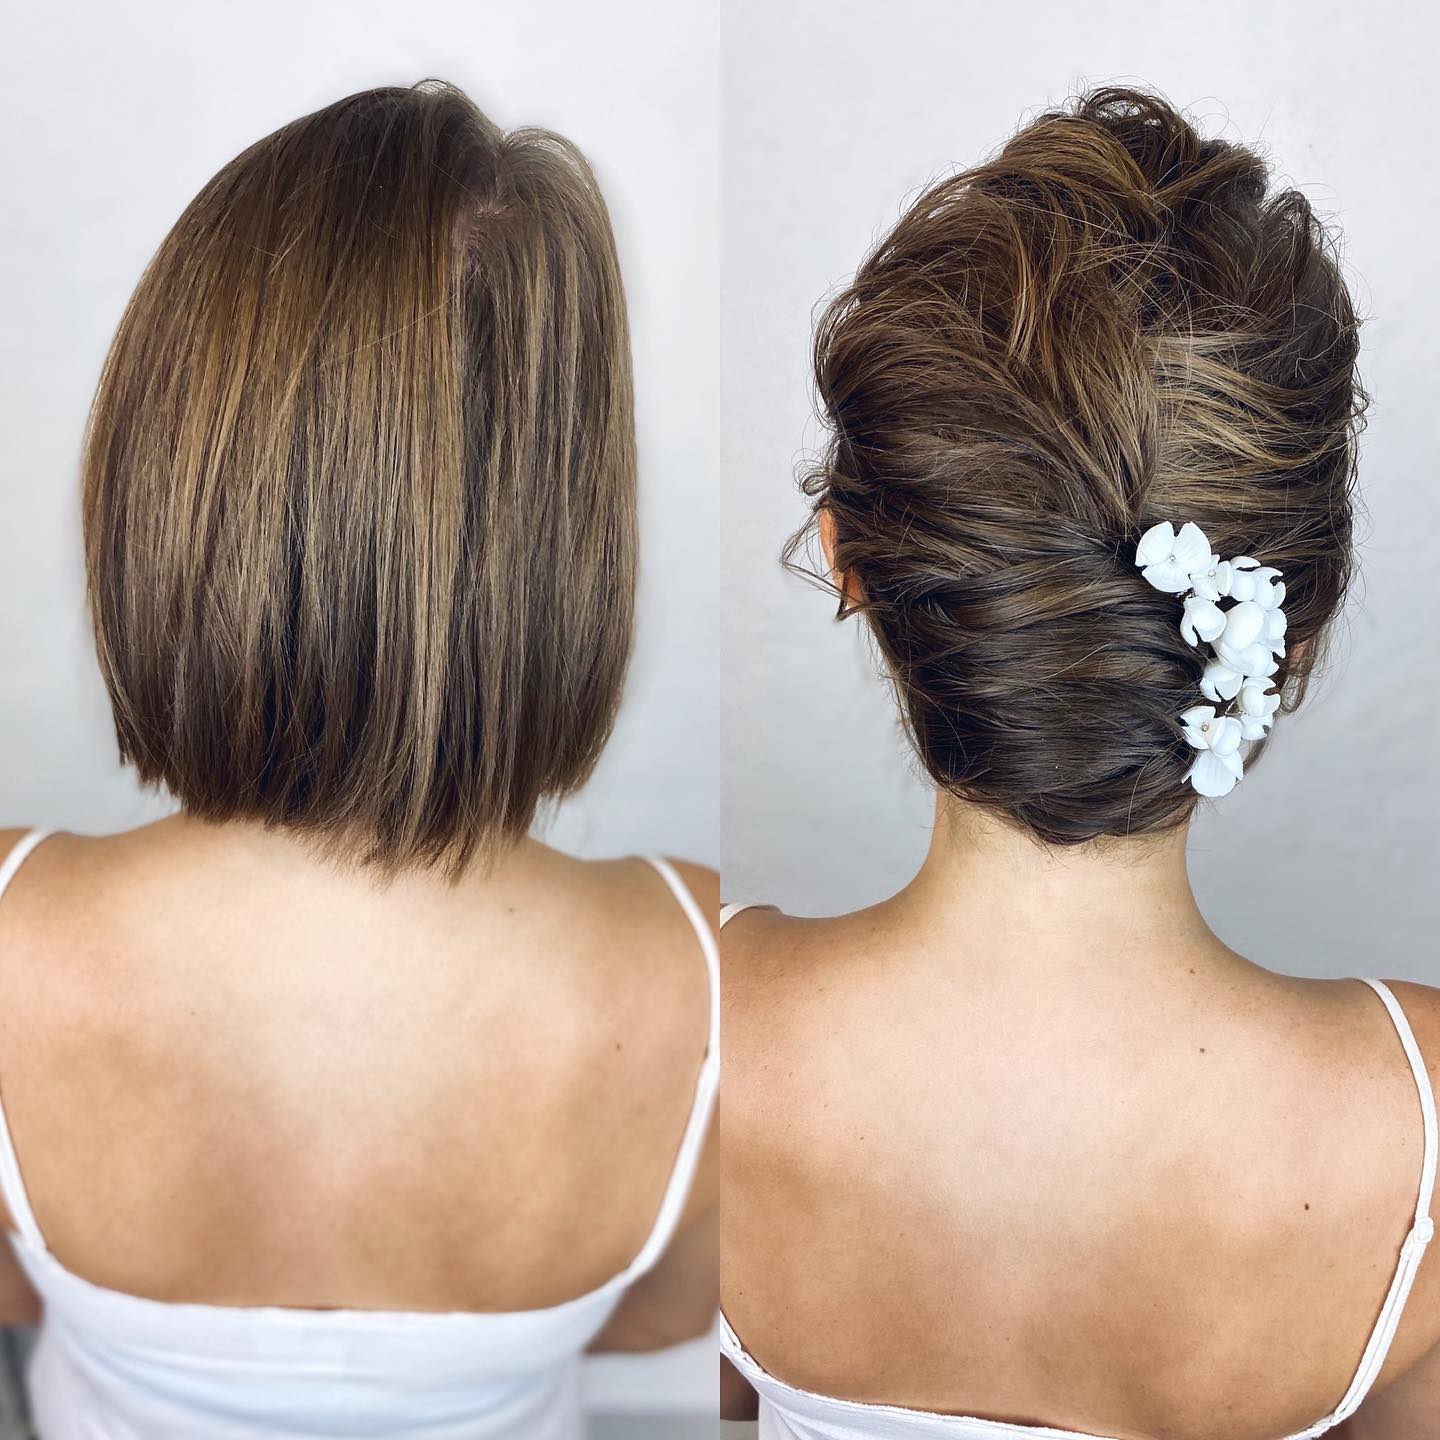 Short Dark Wedding Hairstyle with Side Floral Decor